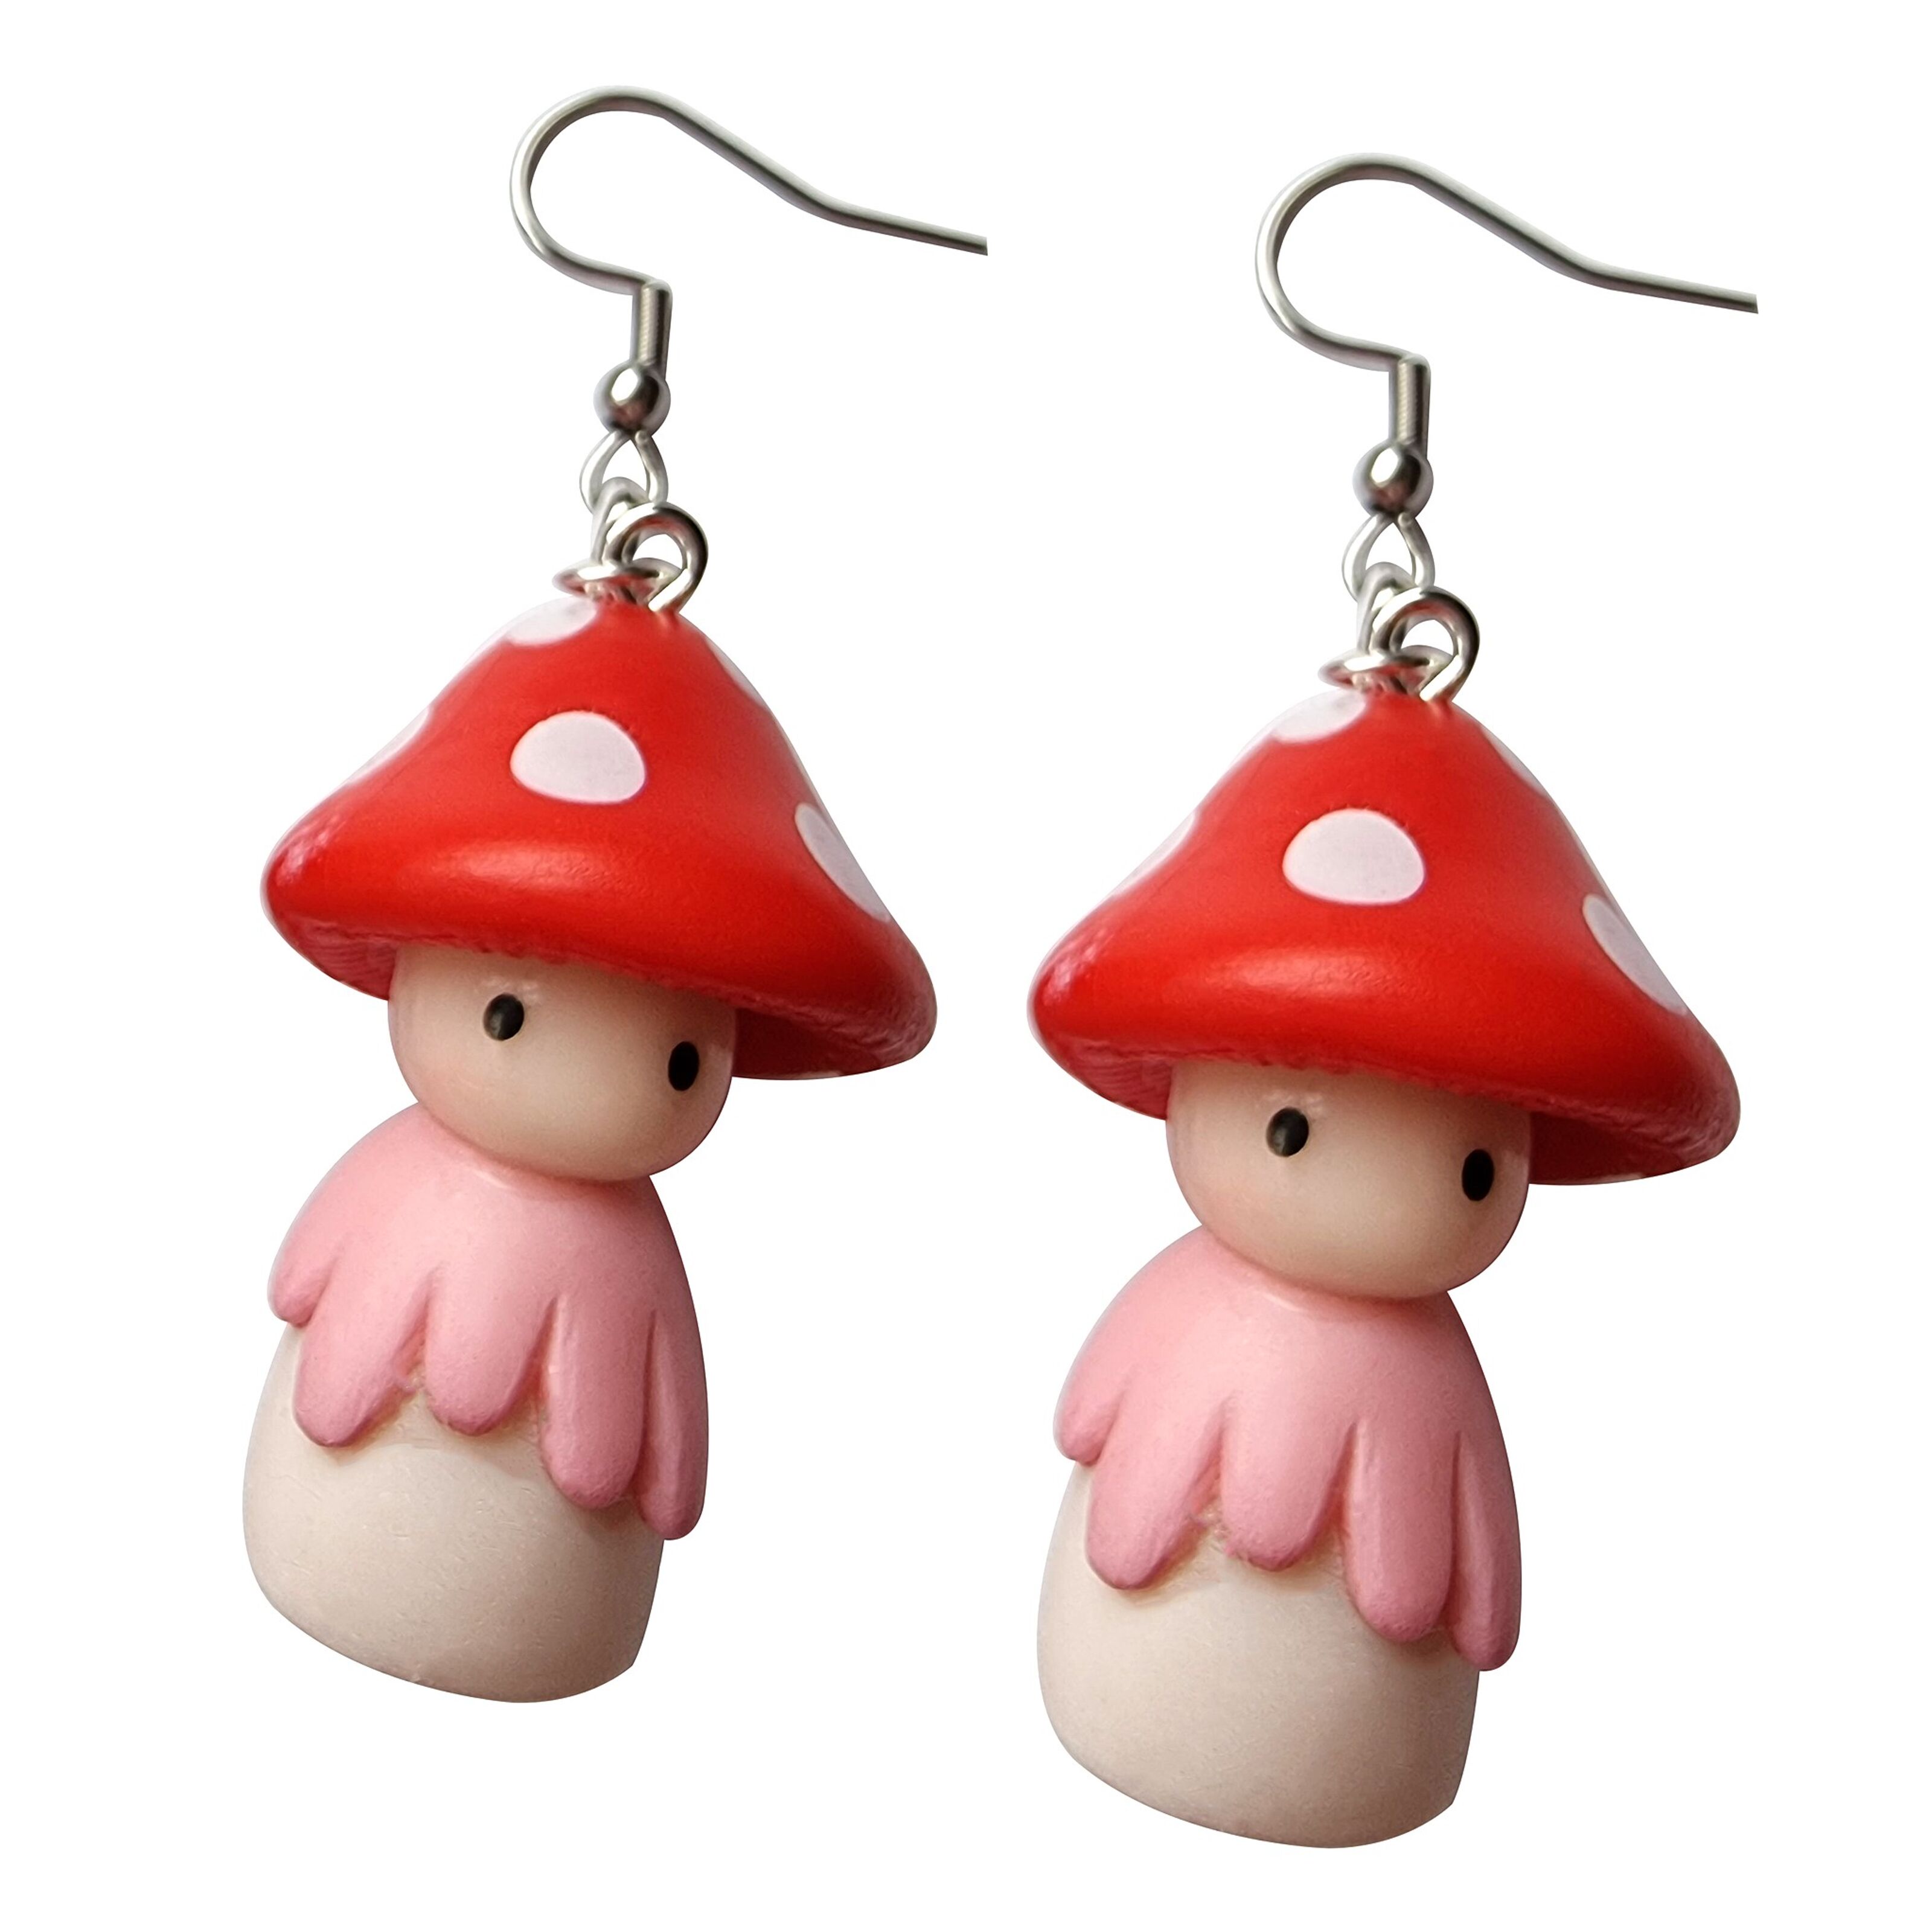 4 Resin Accessories, Cute Soft Clay Bears, Candy Mobile Phone Diy Pendants,  Earrings, Earring Materials, Jewelry Accessories